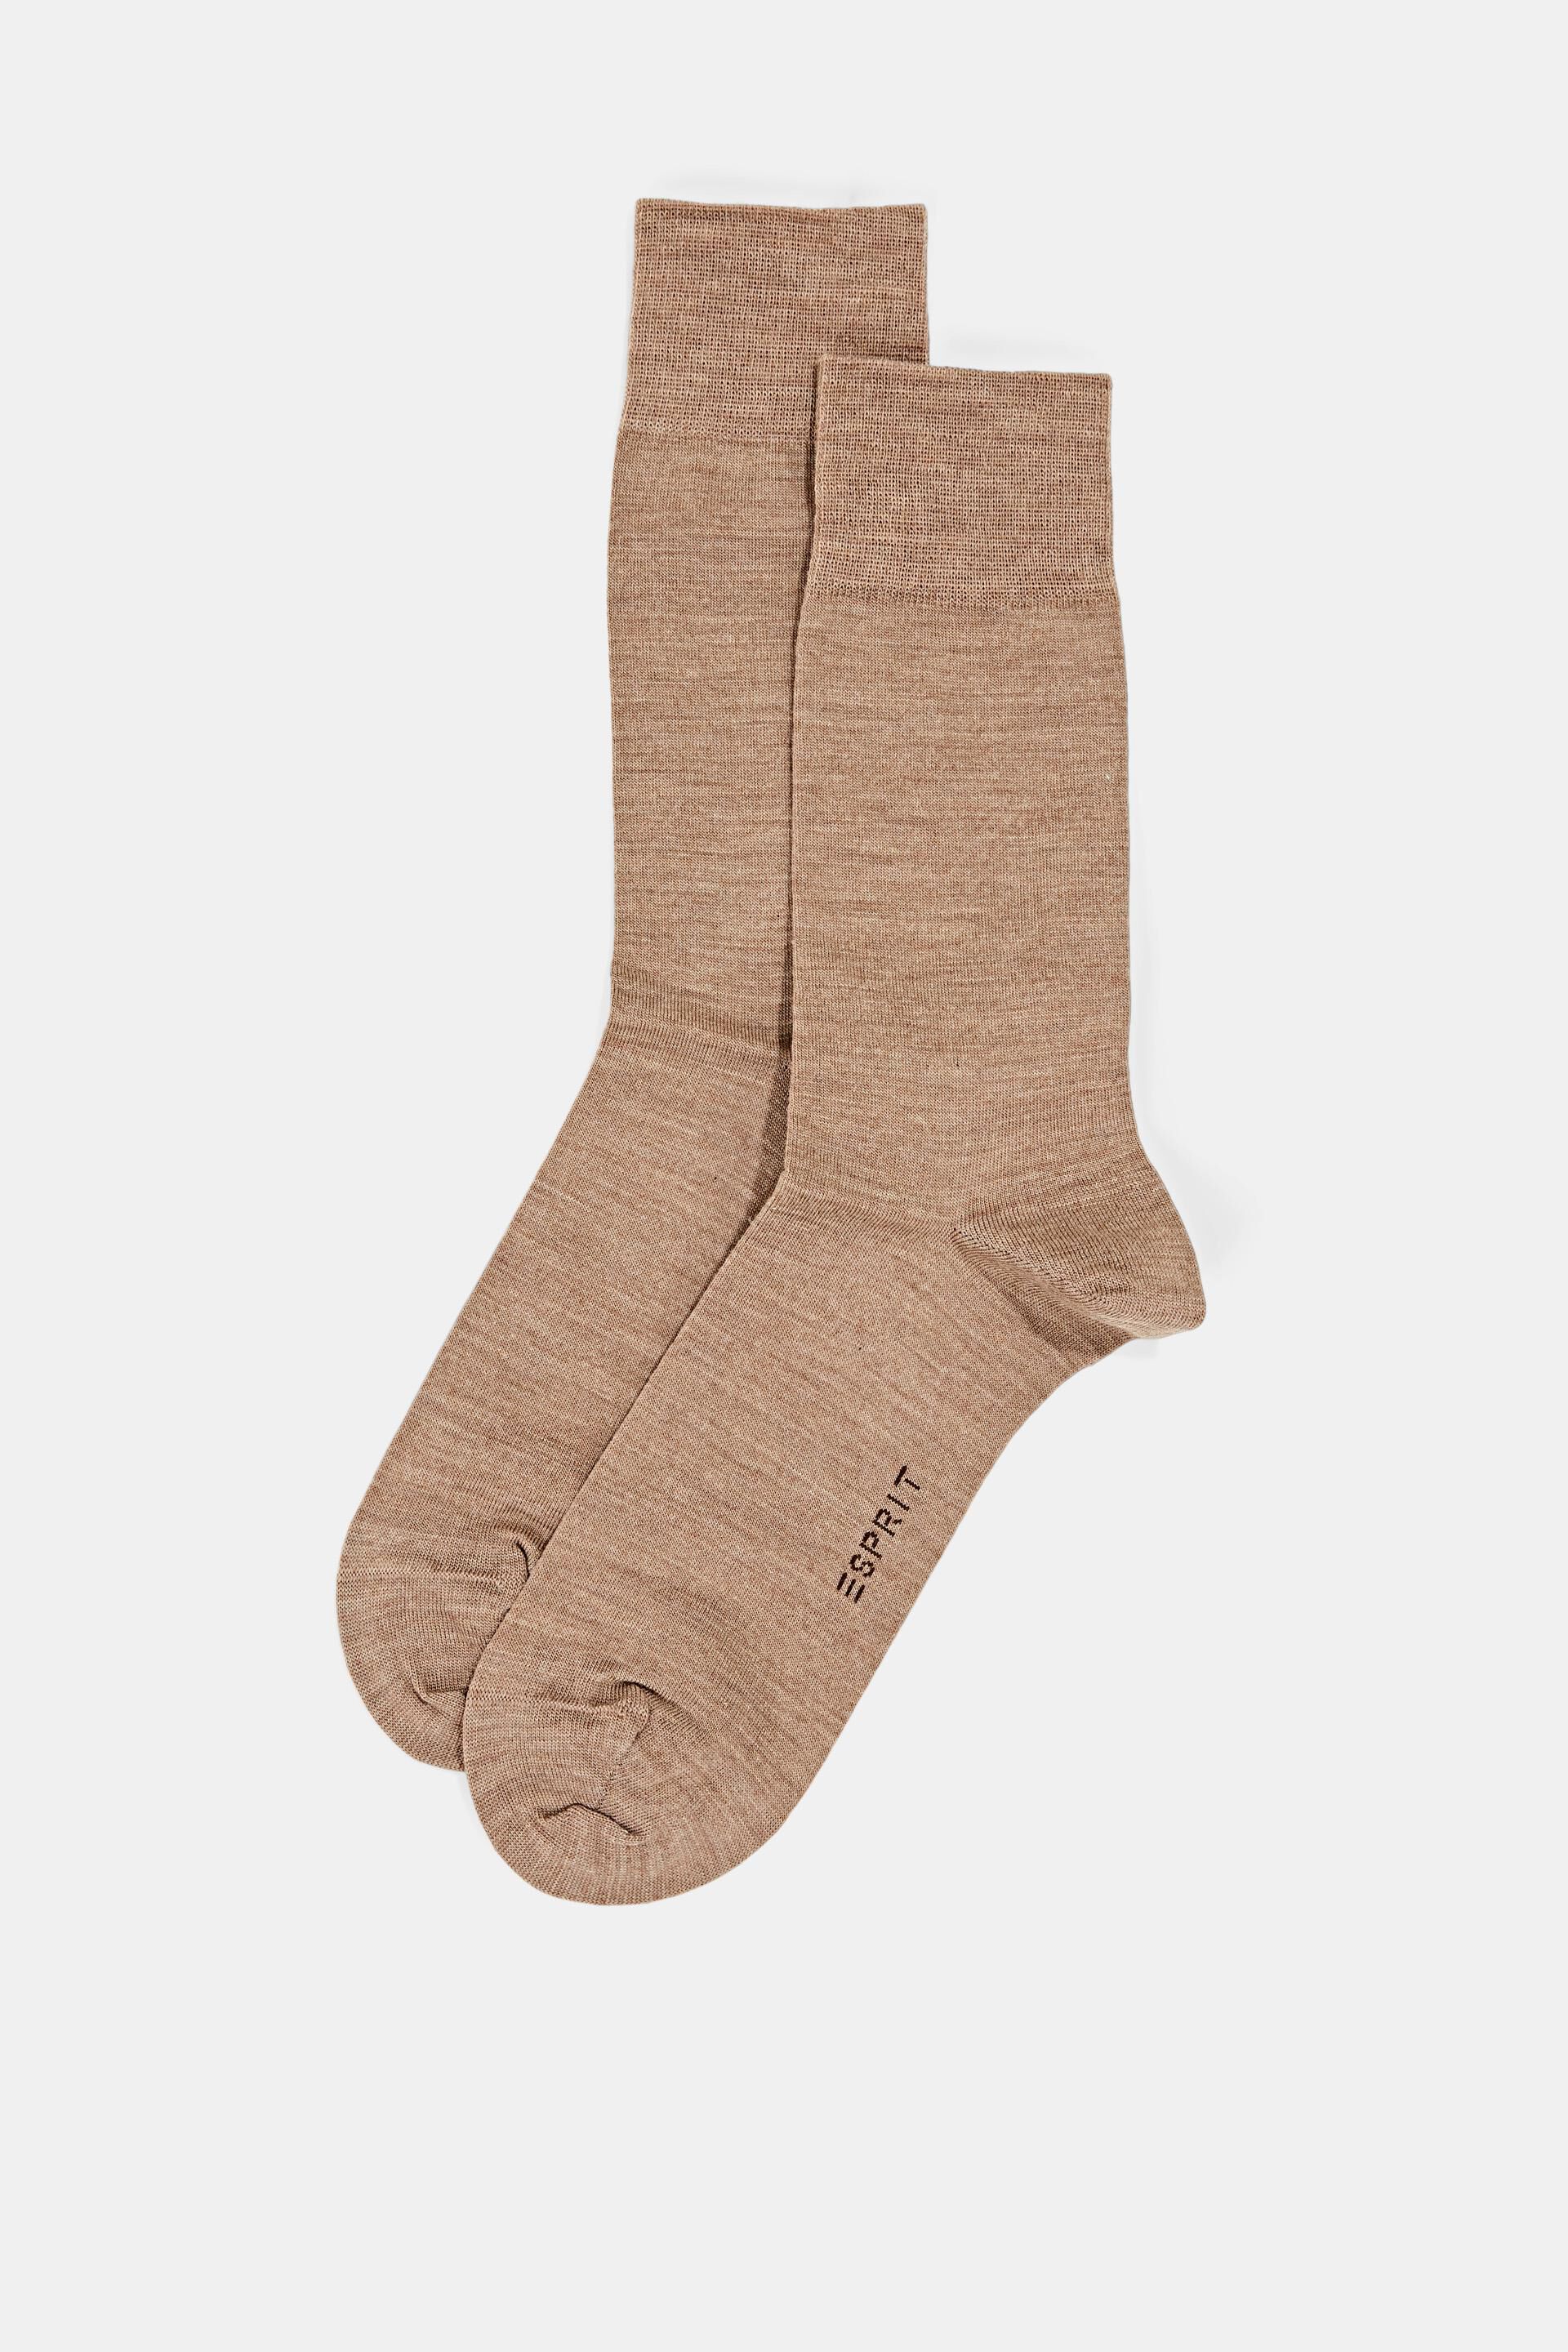 Esprit with of wool knit Double new fine pack socks